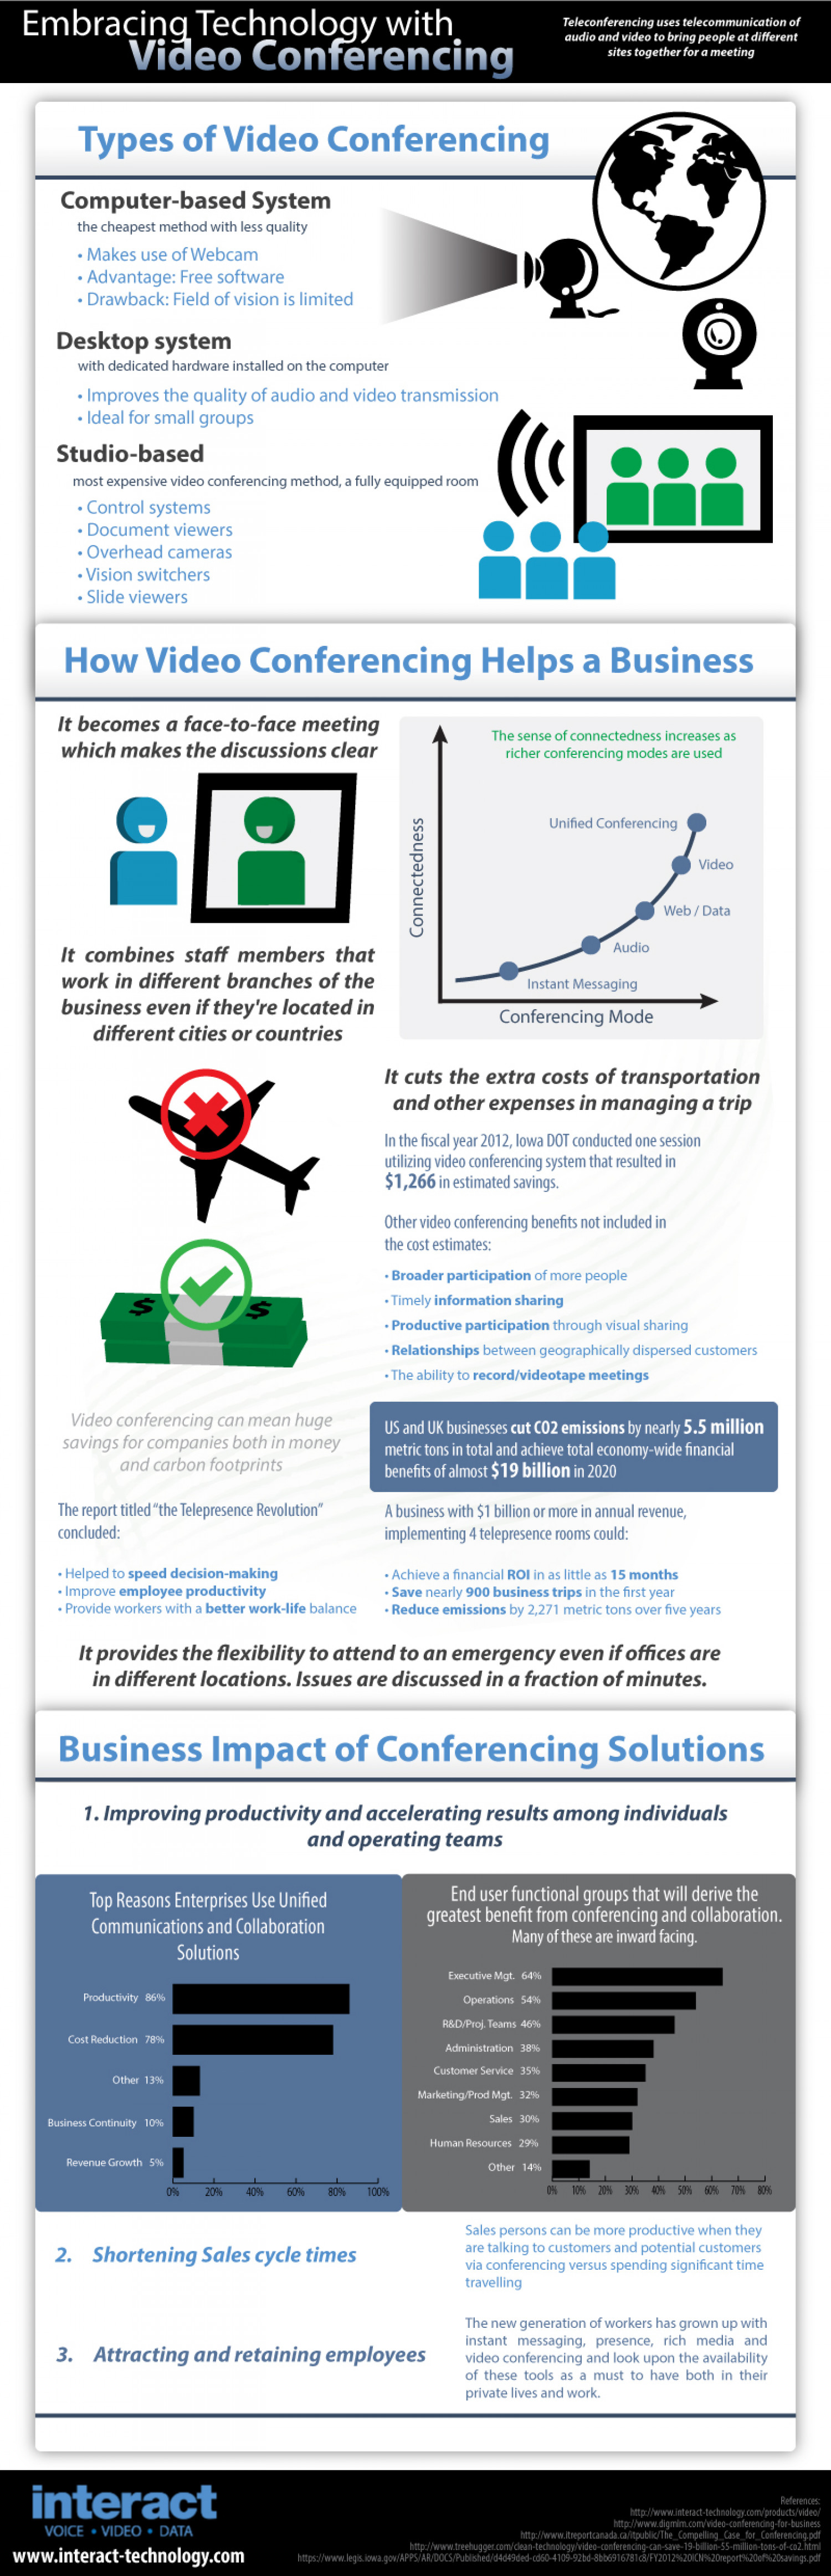 Embracing Technology with Video Conferencing Infographic